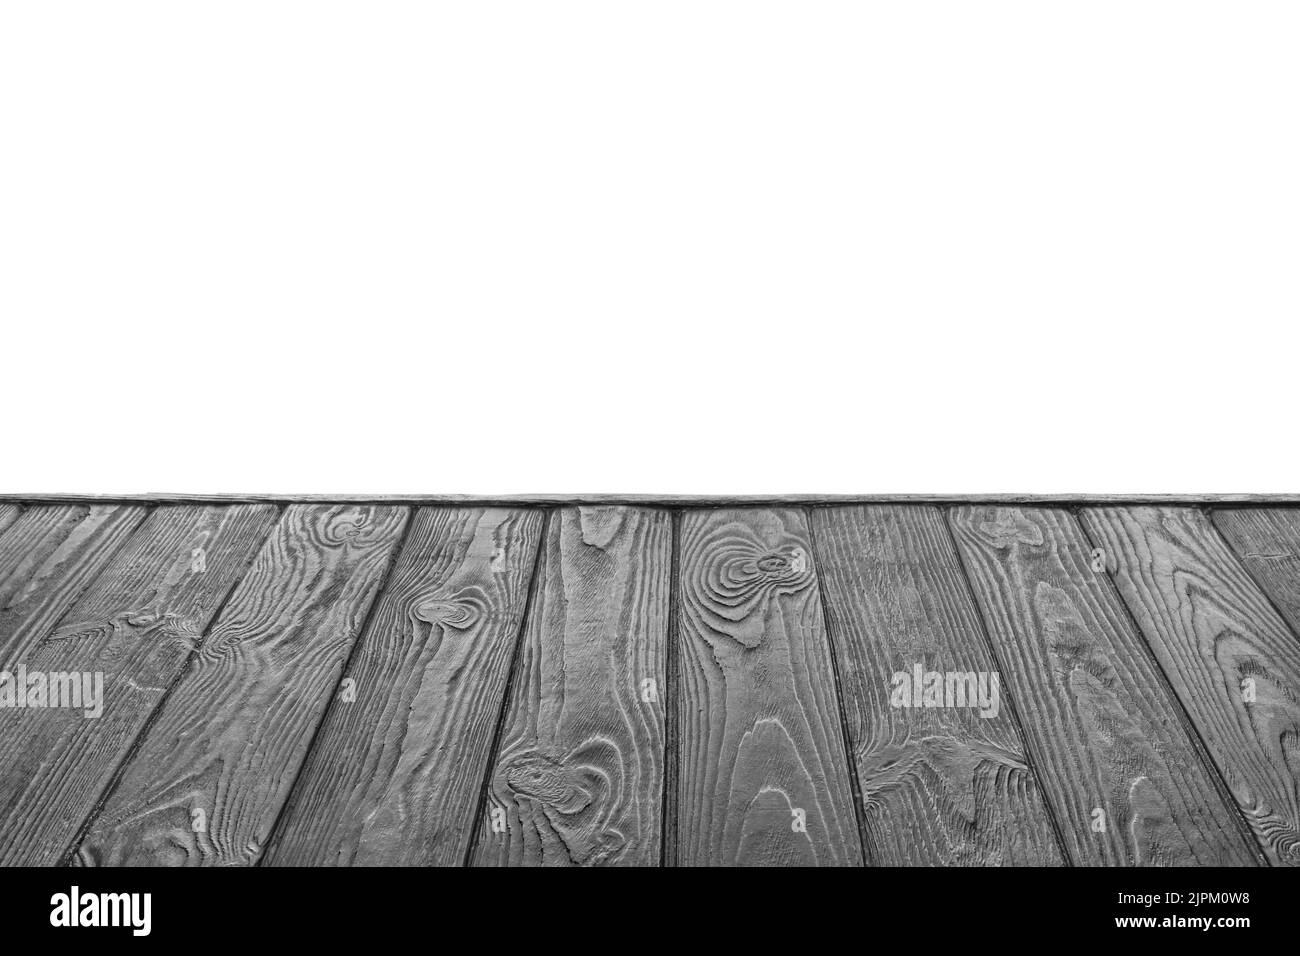 Black wooden board surface against white background Stock Photo